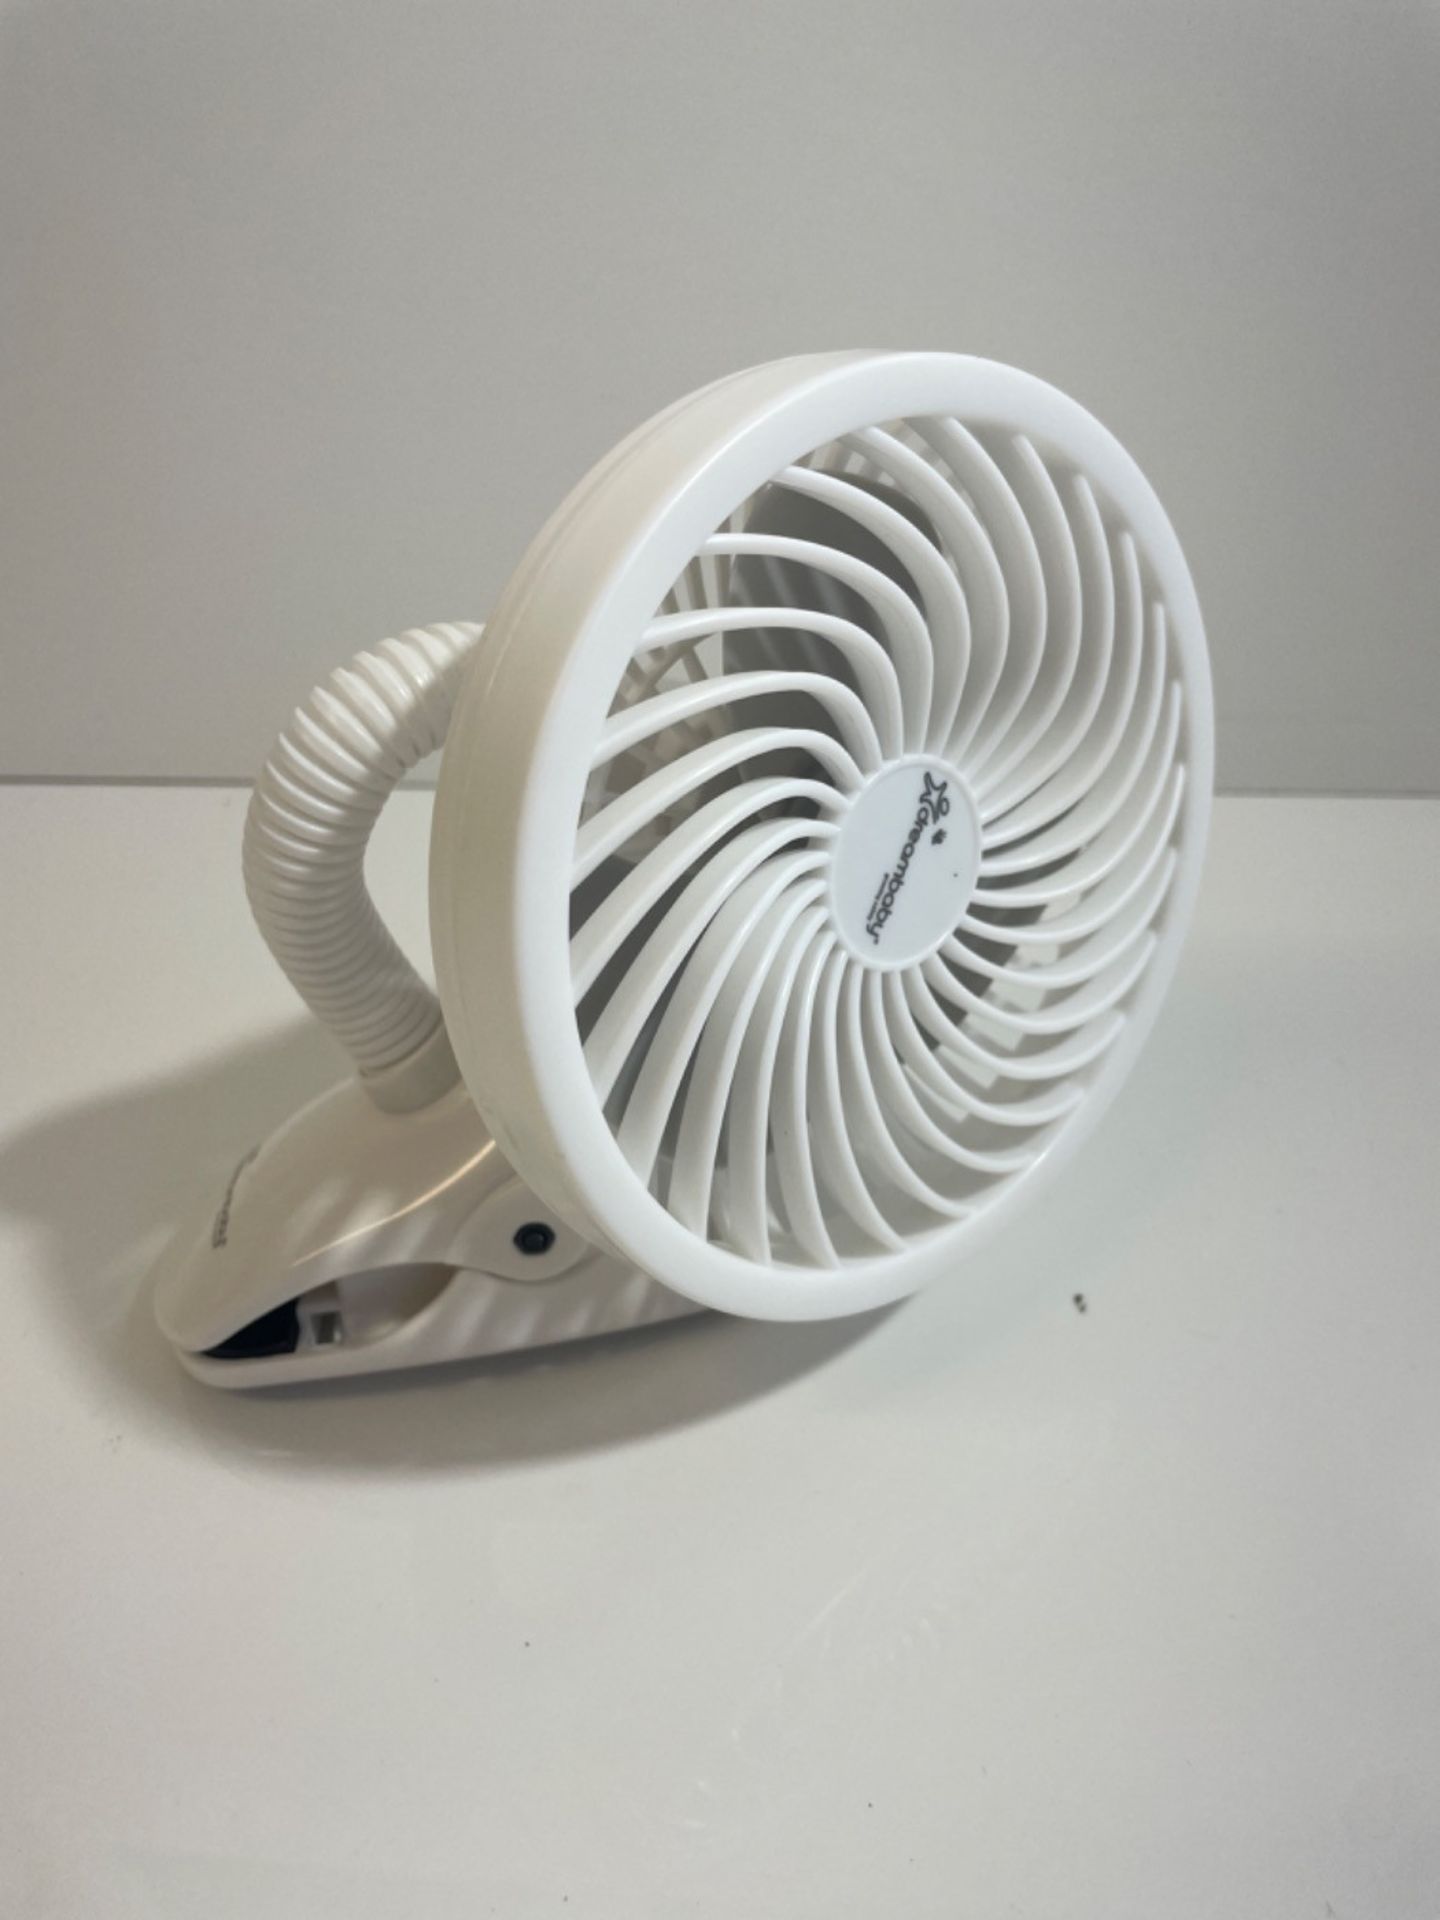 Dreambaby Caged Deluxe EZY-Fit Clip On Fan, White - Image 2 of 3